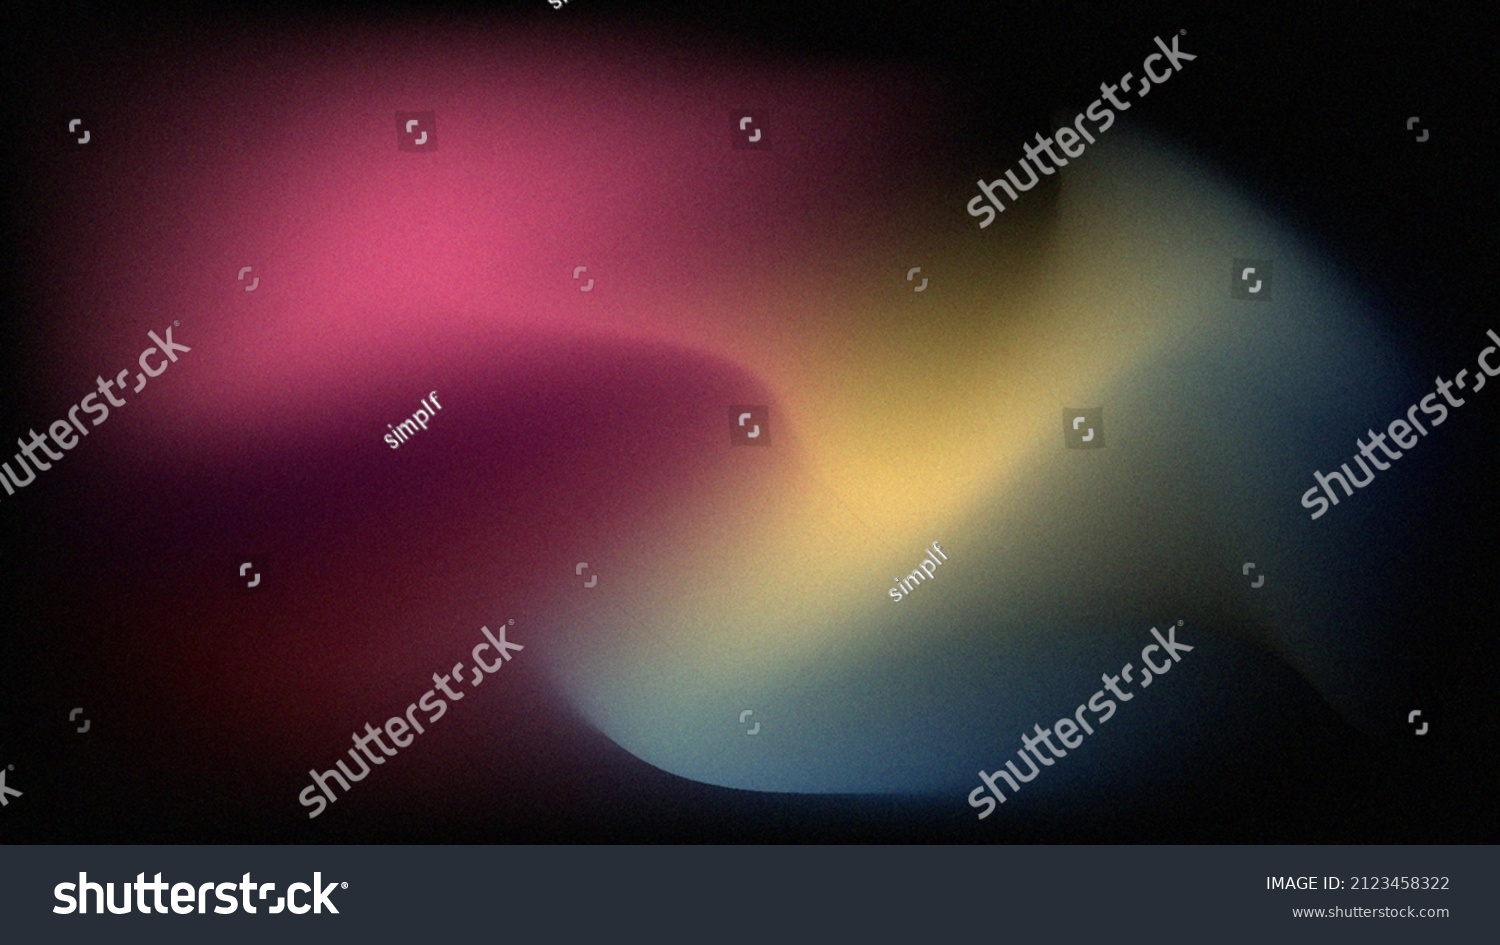 Abstract color gradient, modern blurred background and film grain texture, template with an elegant design concept, minimal style composition, Trendy Gradient grainy texture for your graphic design. #2123458322